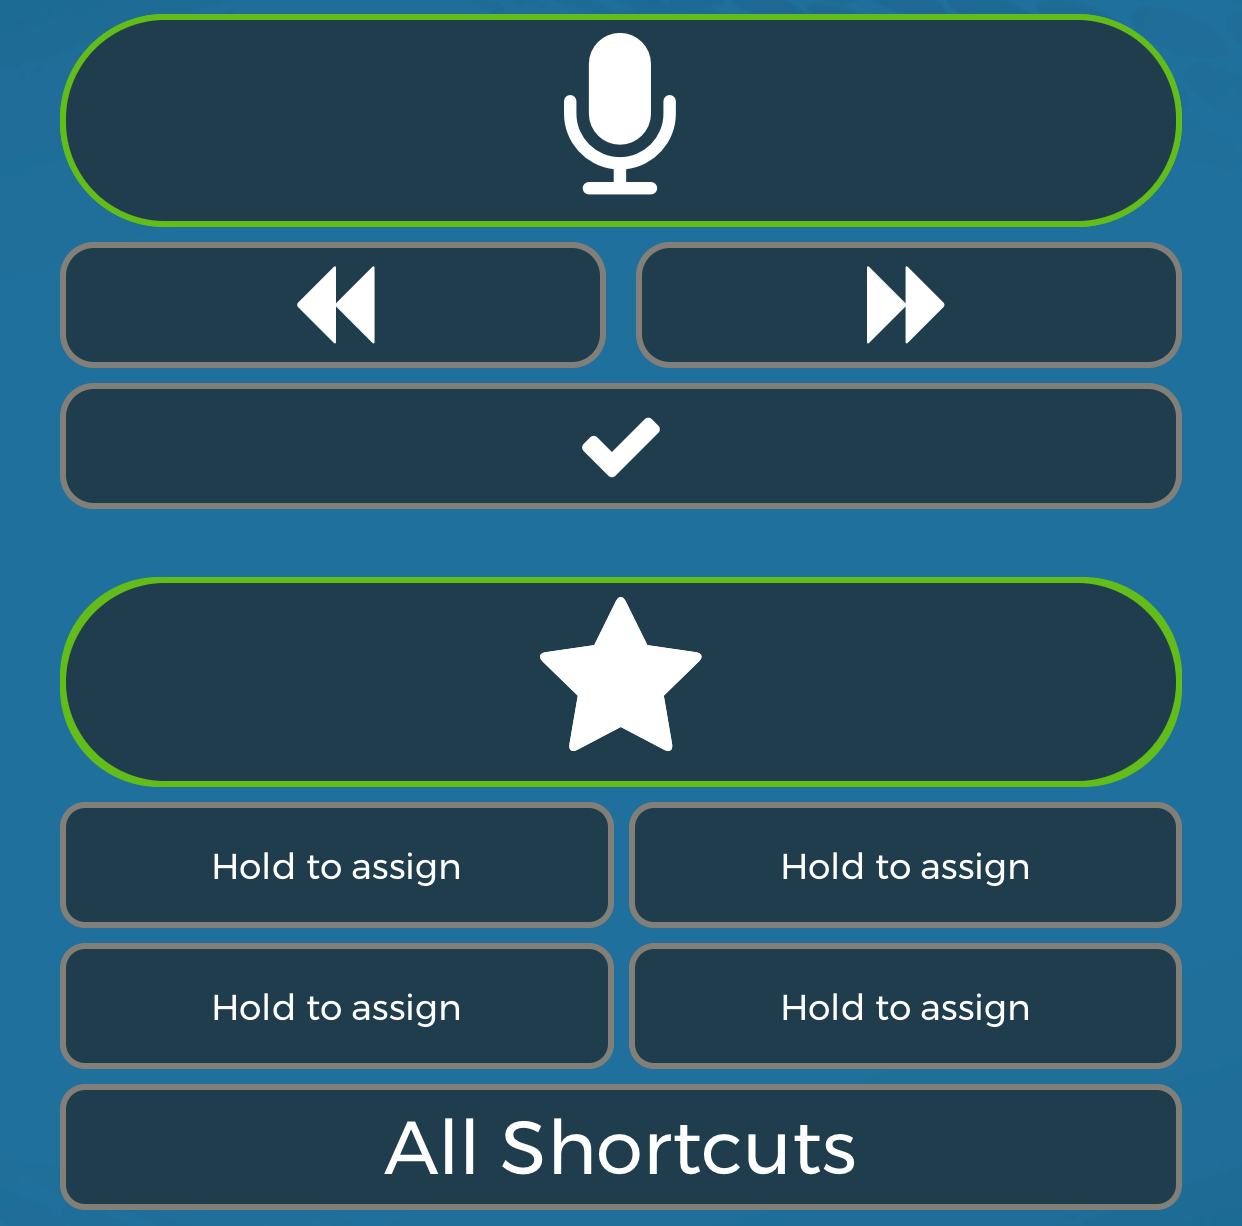 fusion narrate has a wireless smartphone microphone app included